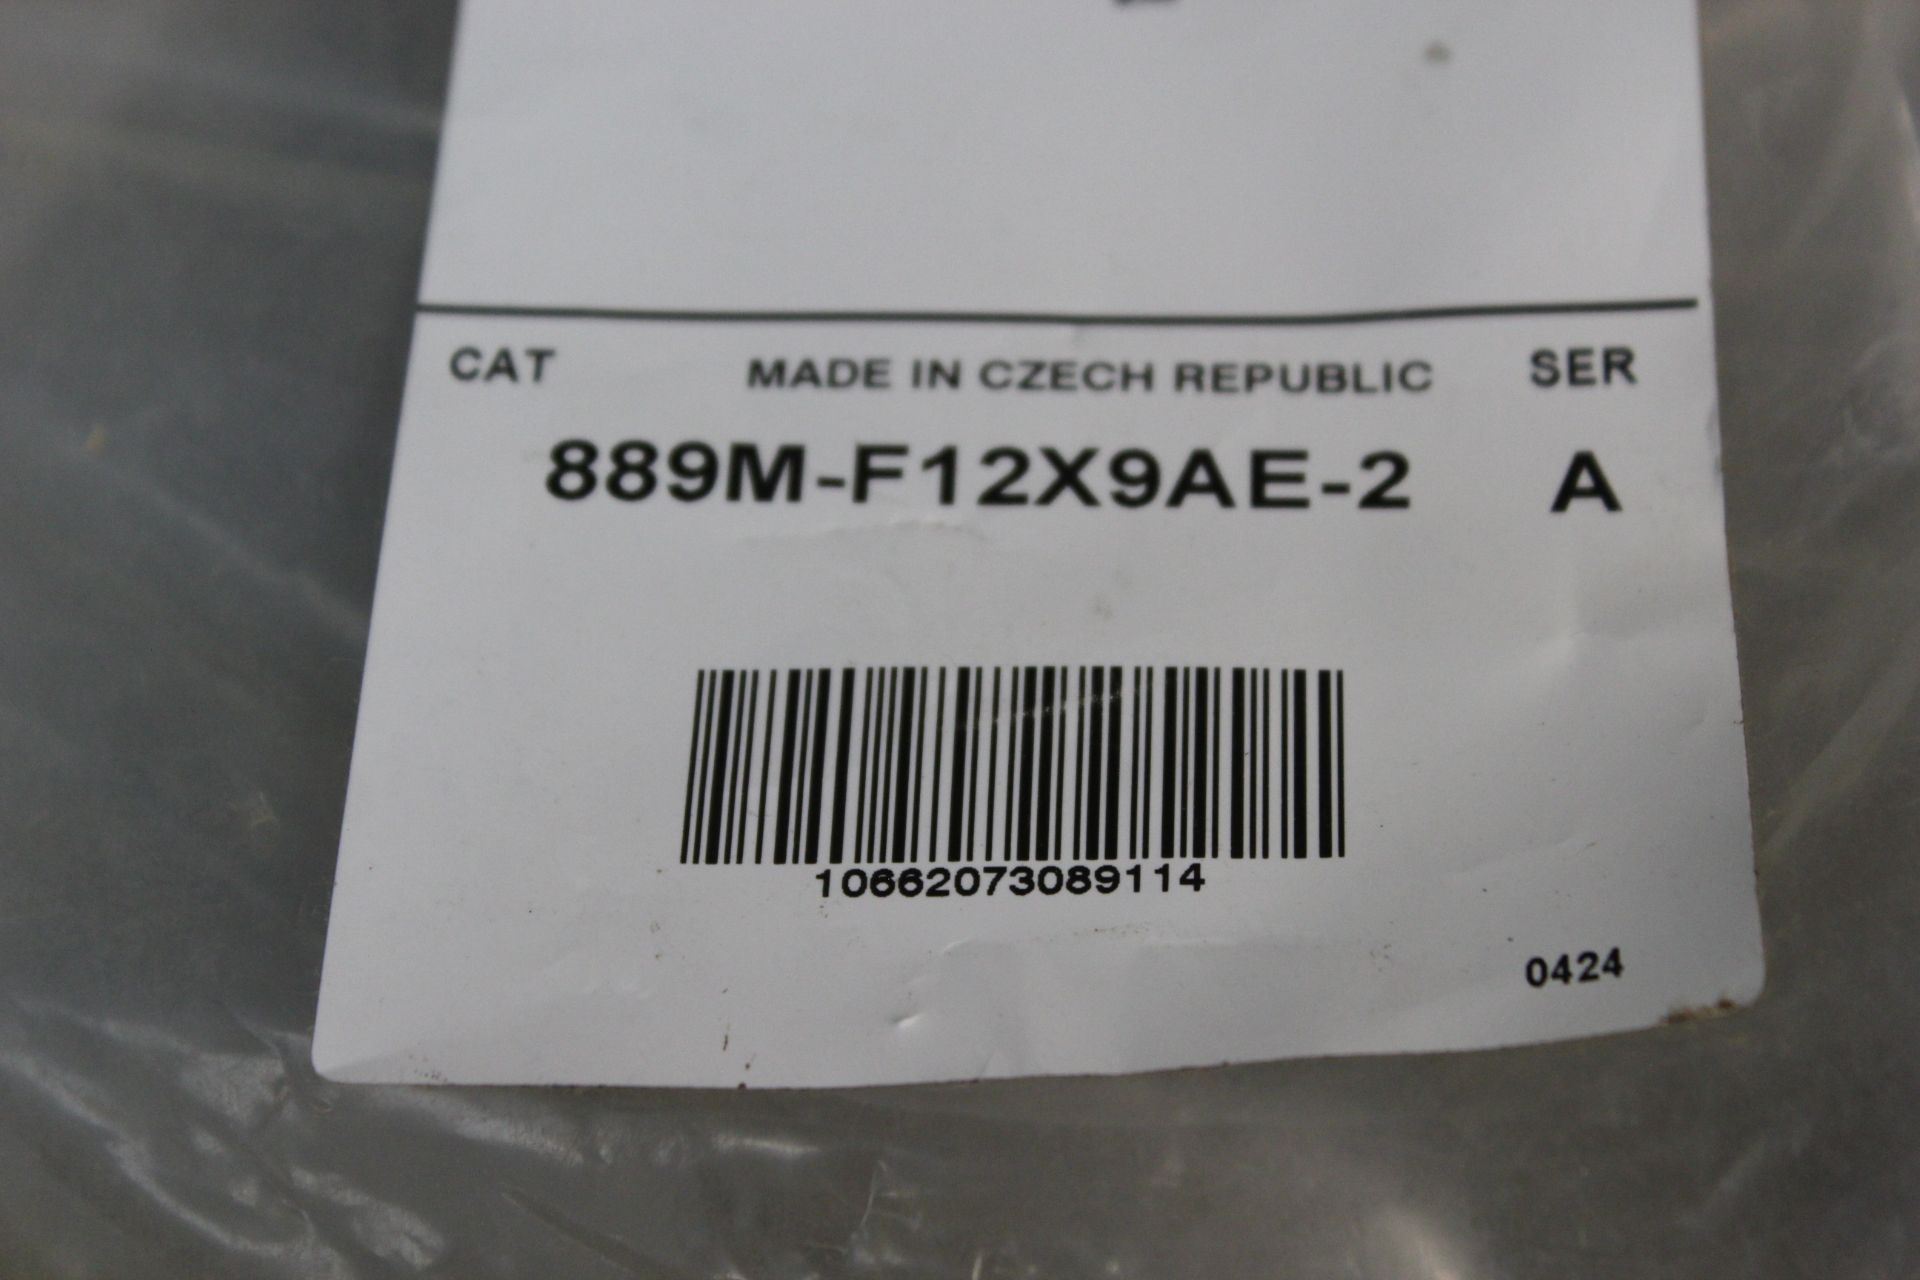 NEW ALLEN BRADLEY 12 PIN STRAIGHT FEMALE CABLE - Image 2 of 2